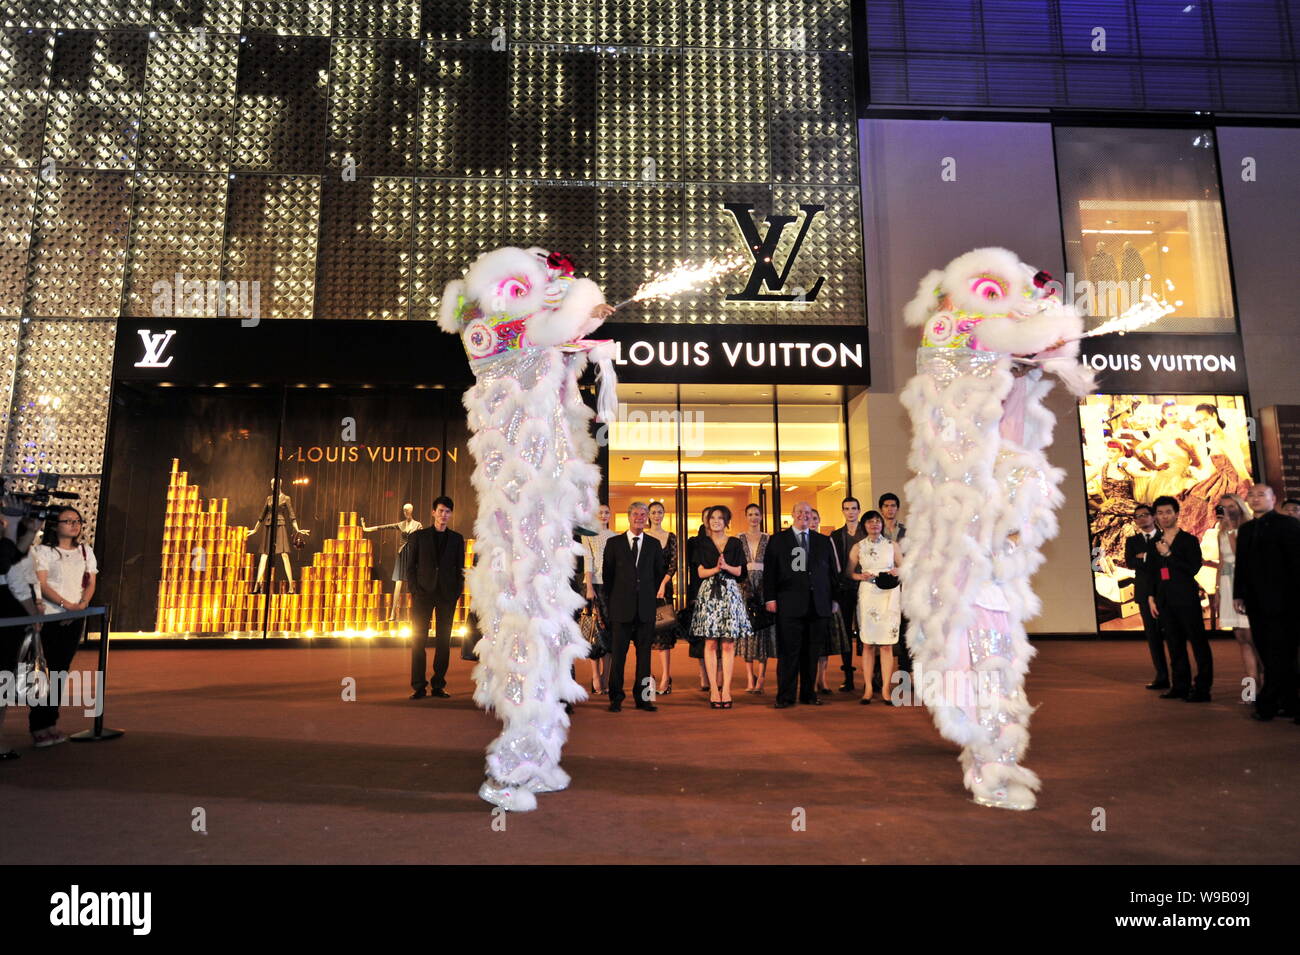 Louis Vuitton Celebrates Store Opening With Special Music Performances!